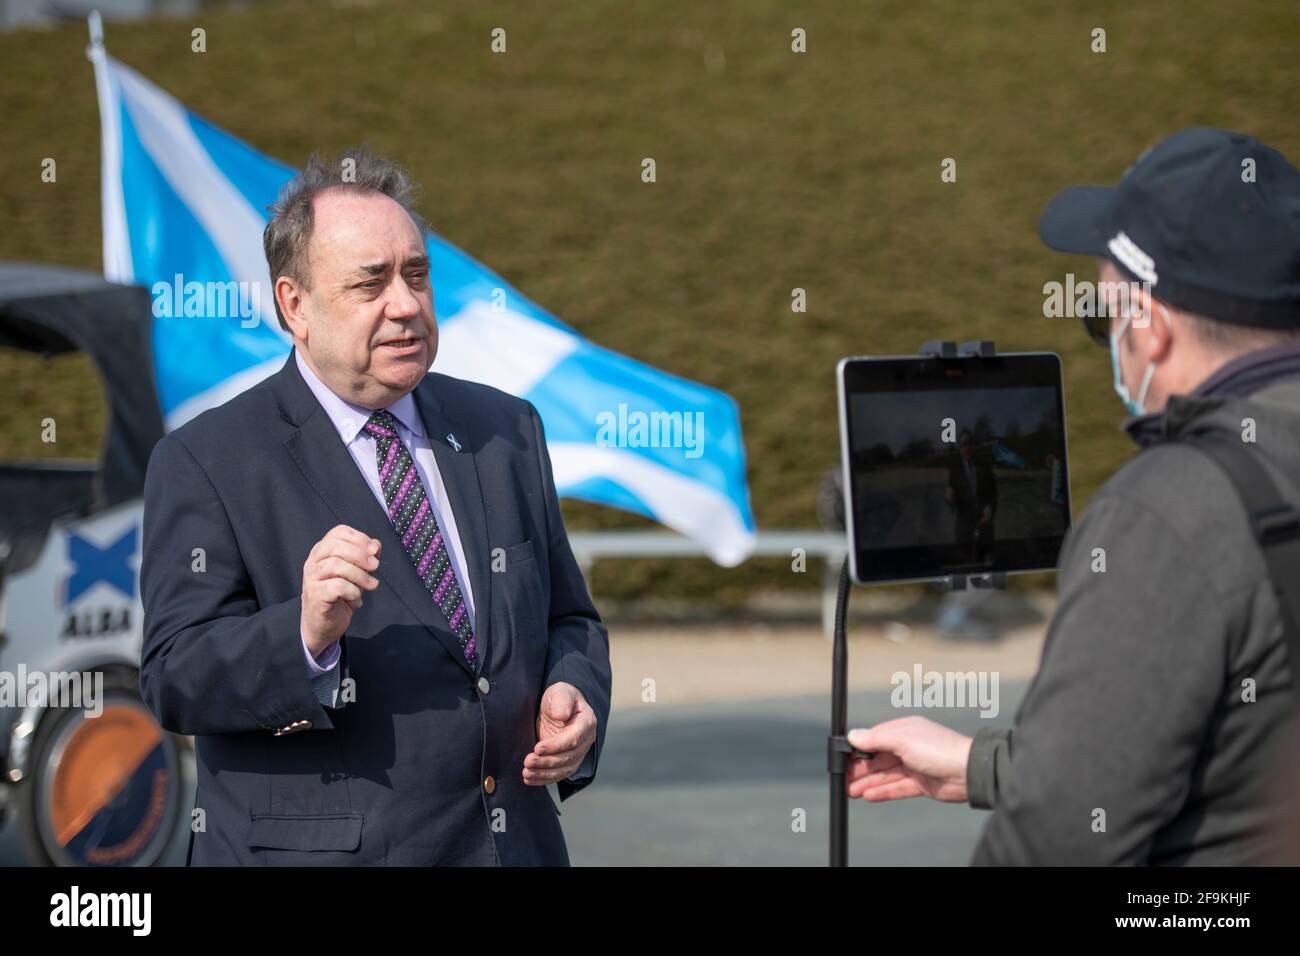 Glasgow, Scotland, UK. 19 April 2021. PICTURED: Alex Salmond Leader of the Alba Party (seen during media interviews) marks the start of the ALBA Glasgow campaign with ALBA Glasgow Candidates: Cllr Michelle Ferns, Ailsa Gray, Cllr Shahid Farooq and Lynn McMahon. Mr Salmond will outline ALBA's plans to enhance the Educational Maintenance Allowance and Cllr Ferns will set out how ALBA intend to provide Financial support to taxi drivers and private hire drivers. Speaking in advance of the Photo call ALBA Party Leader Alex Salmond said: “ Today we are announcing targeted measures to support y Stock Photo